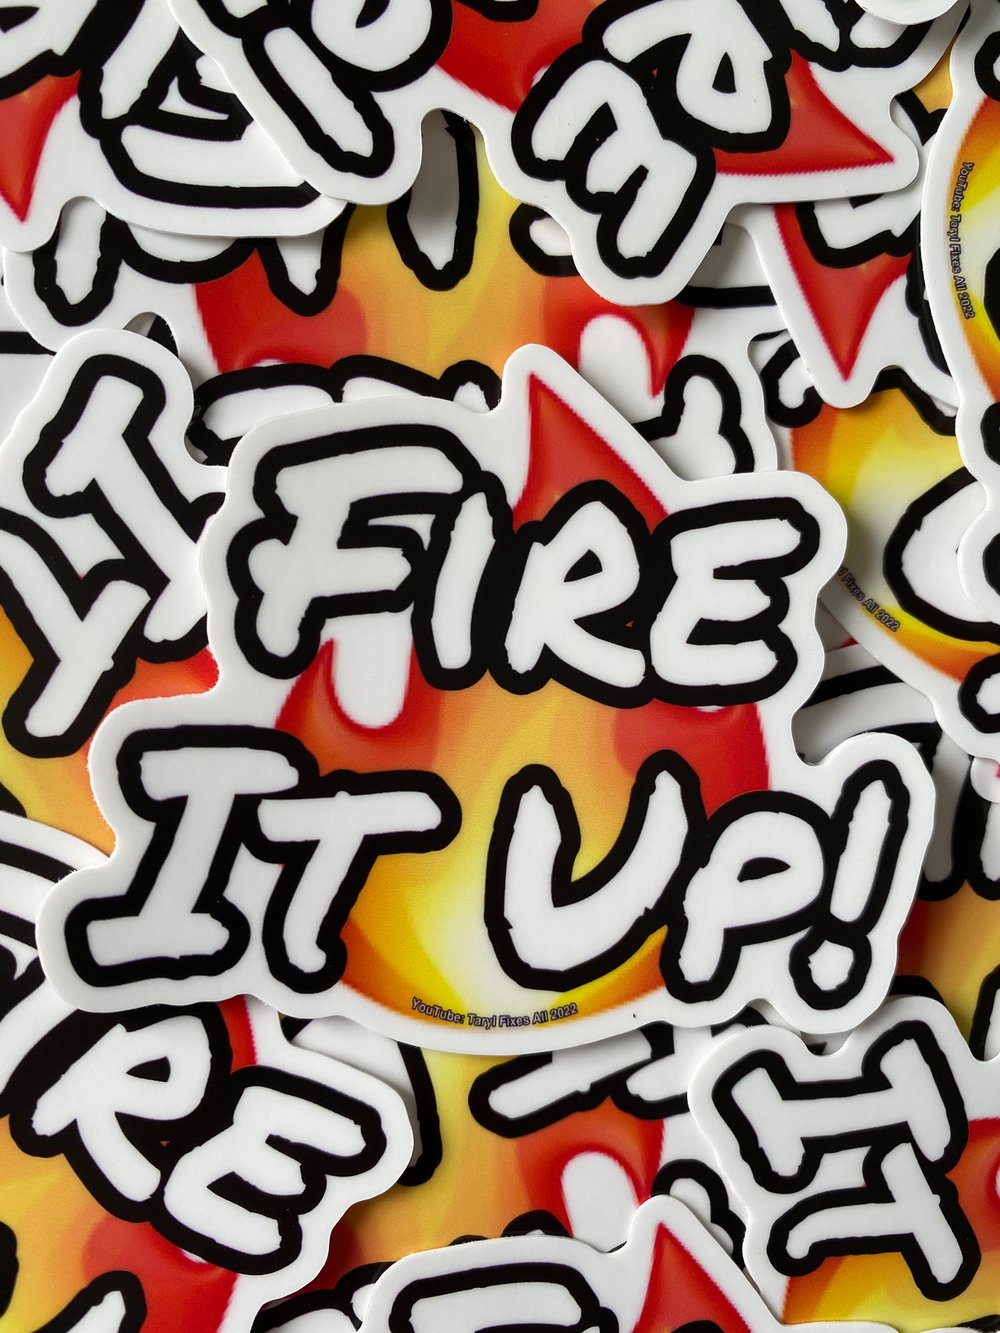 NEW 'Fire It Up!' Stickers!! (FREE USA Shipping!) 